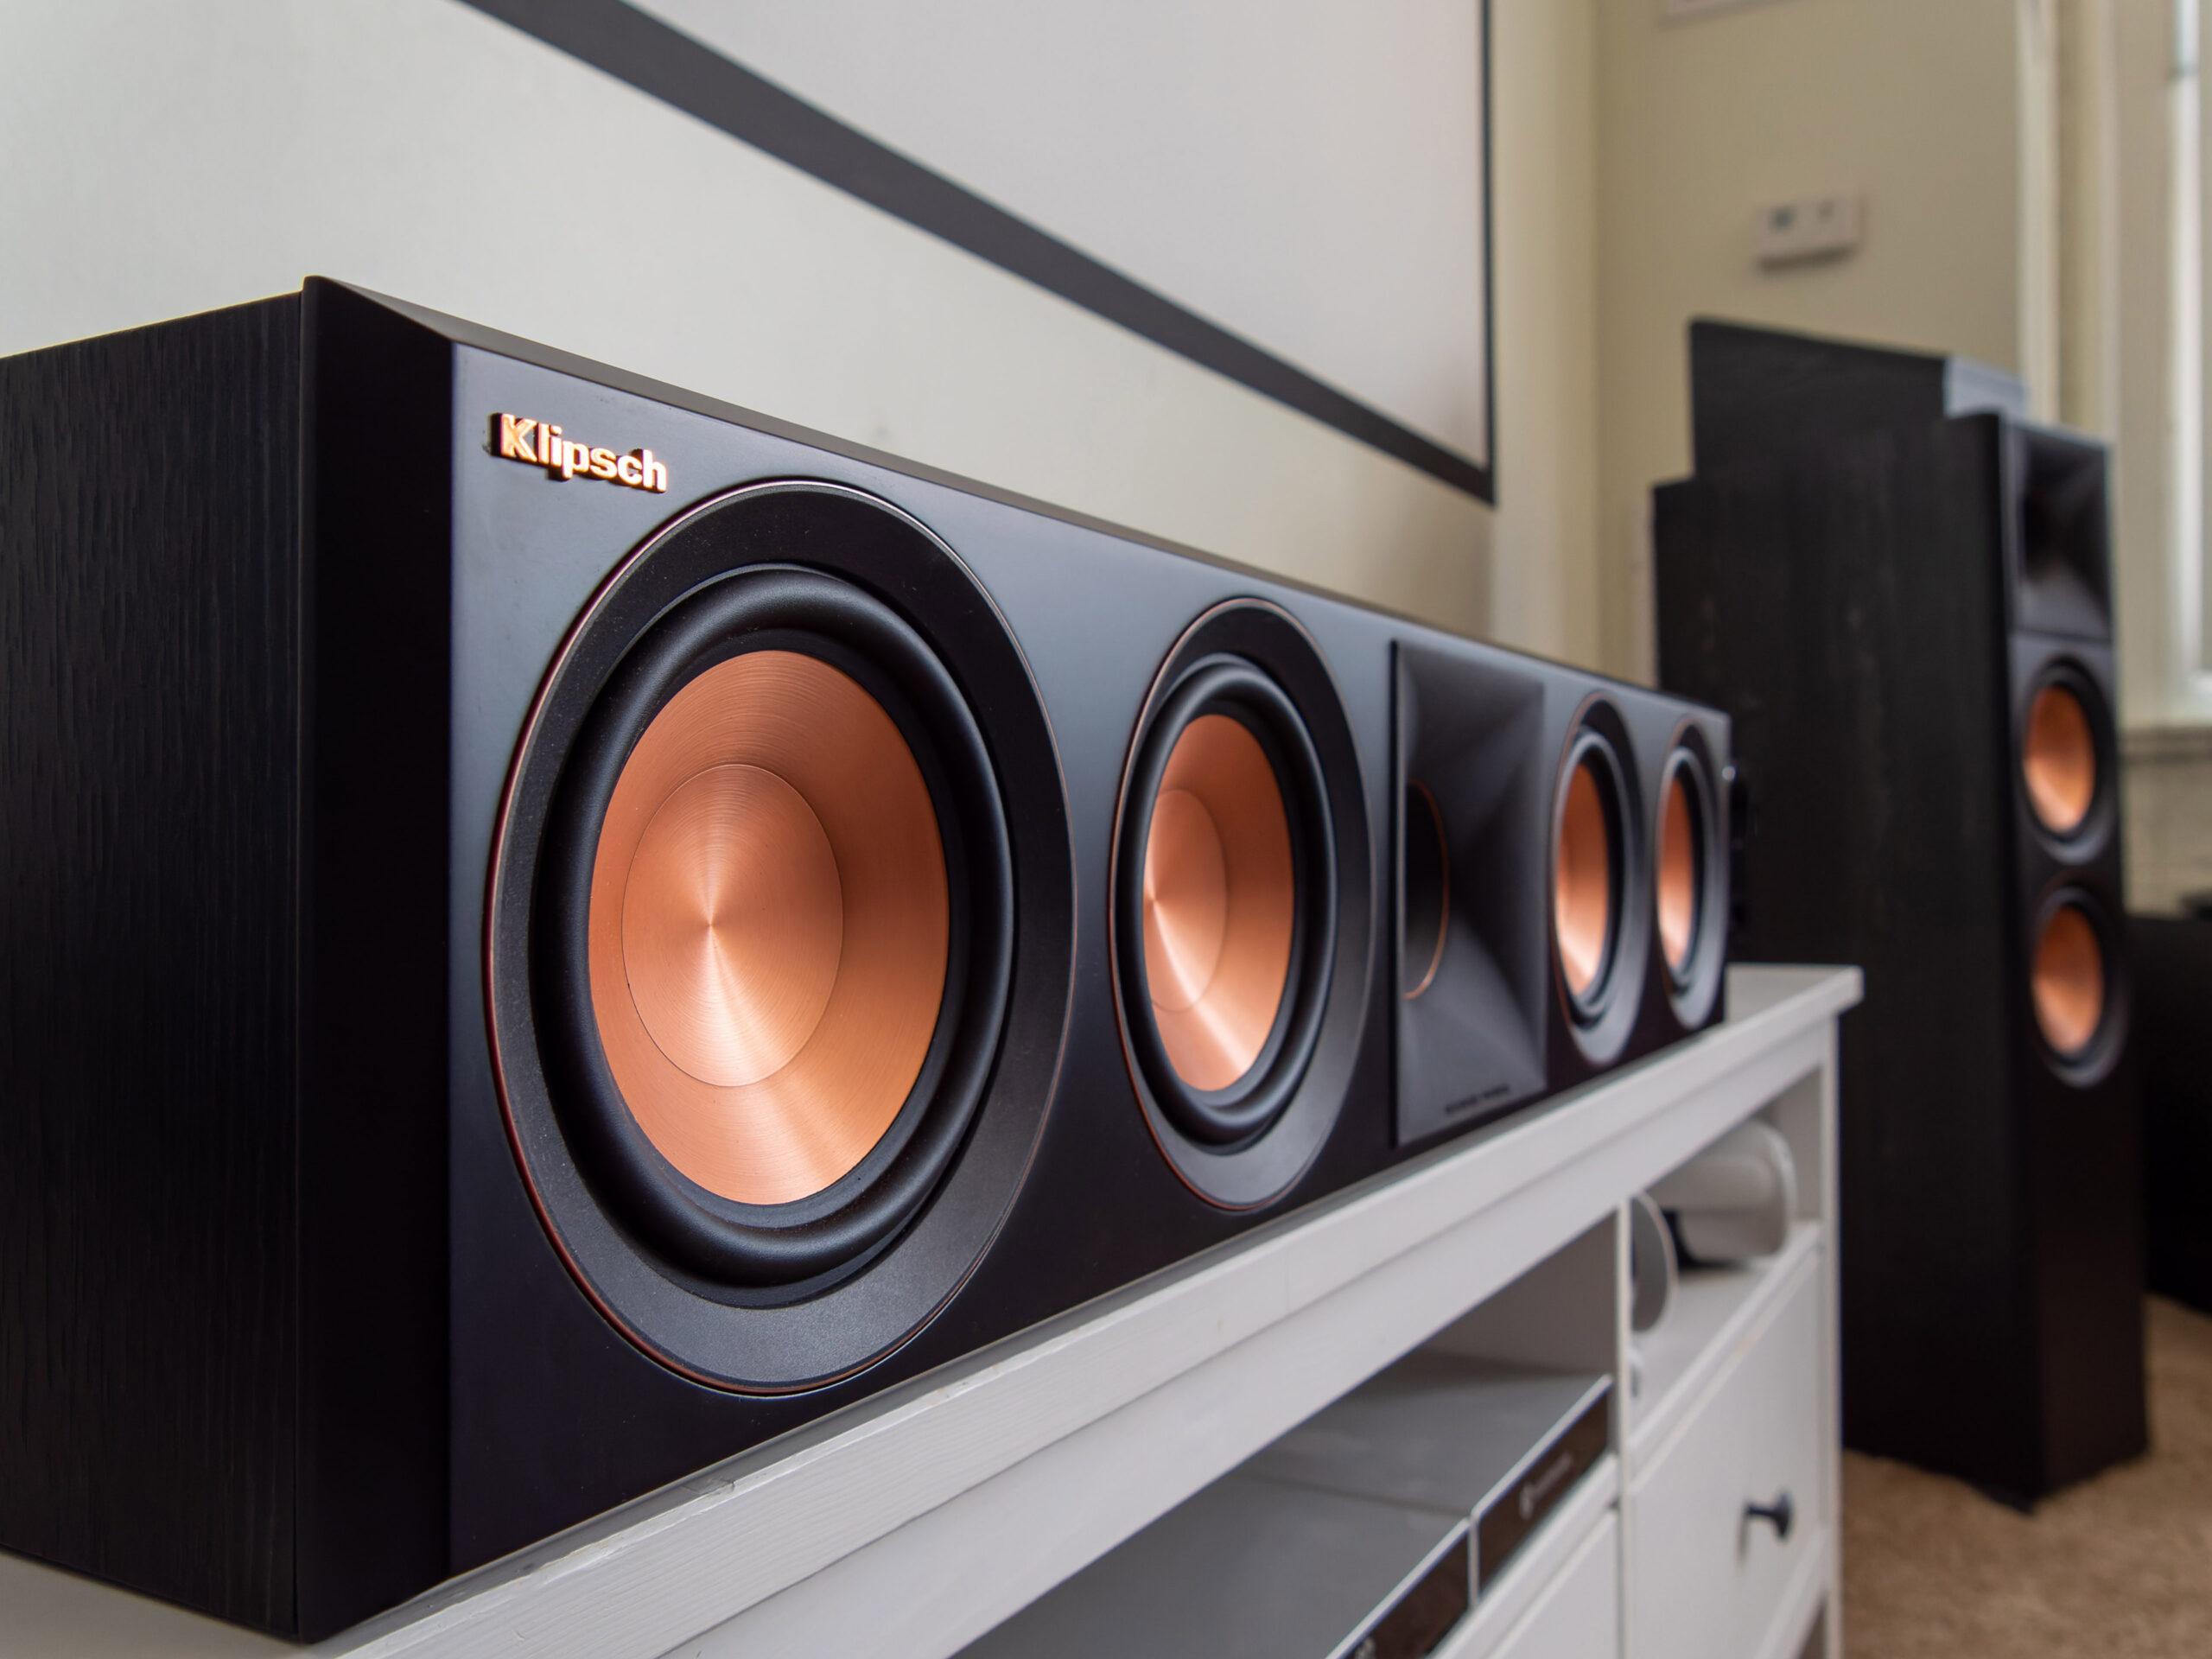 Klipsch has refined a winning formula with its updated Reference Premiere line ea9e32e1 p1013094 rw2 dxo deepprime scaled